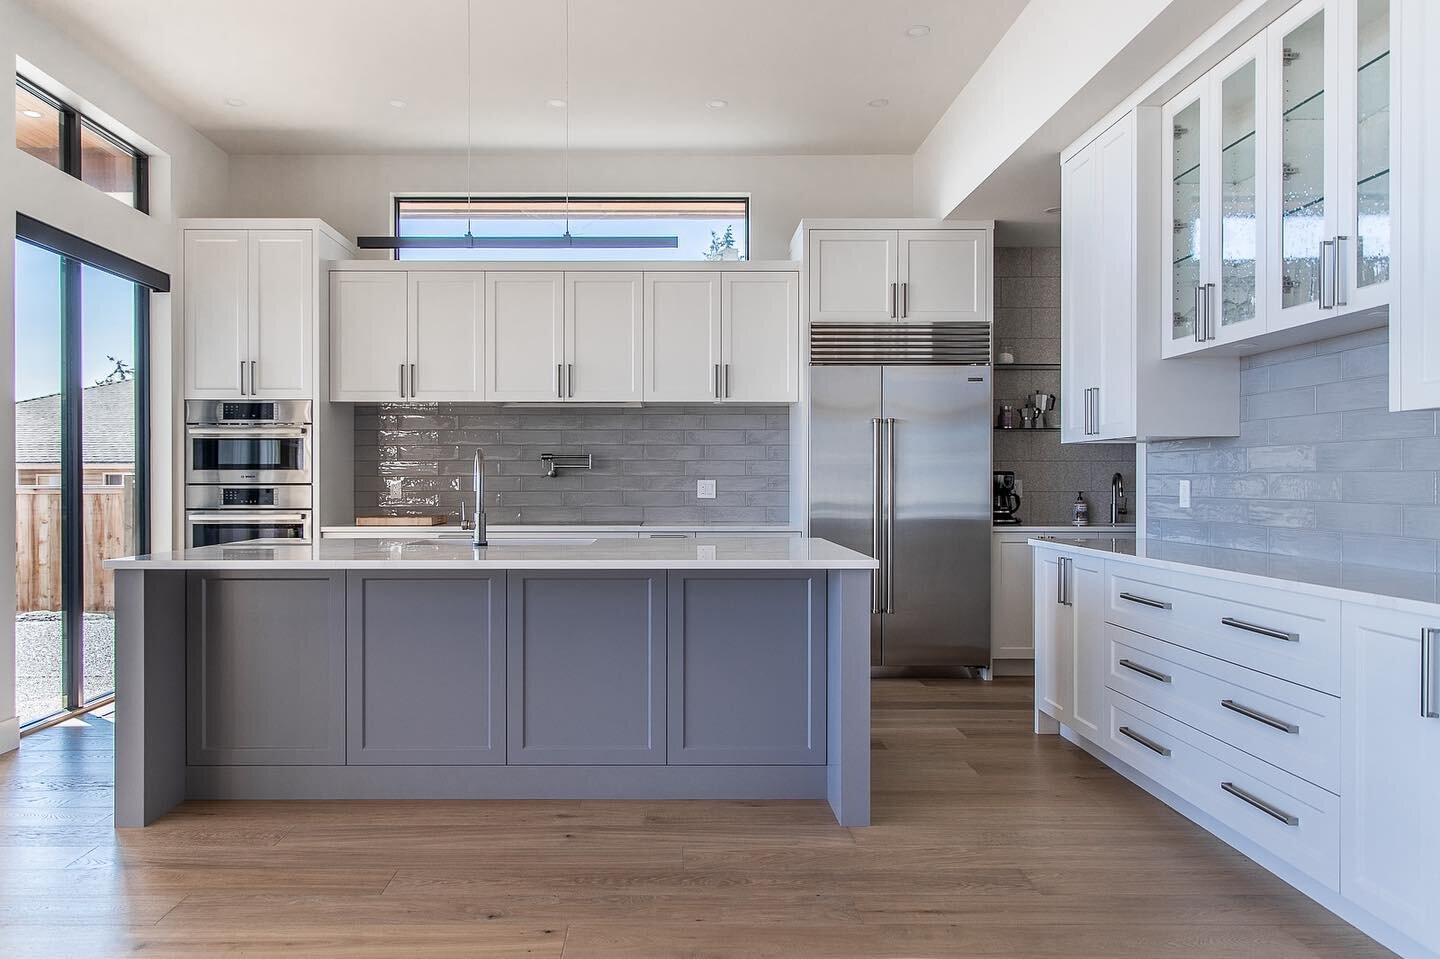 Custom kitchen with oceanfront view #redfernmedia #customhome #customcabinets #kitchenwithaview